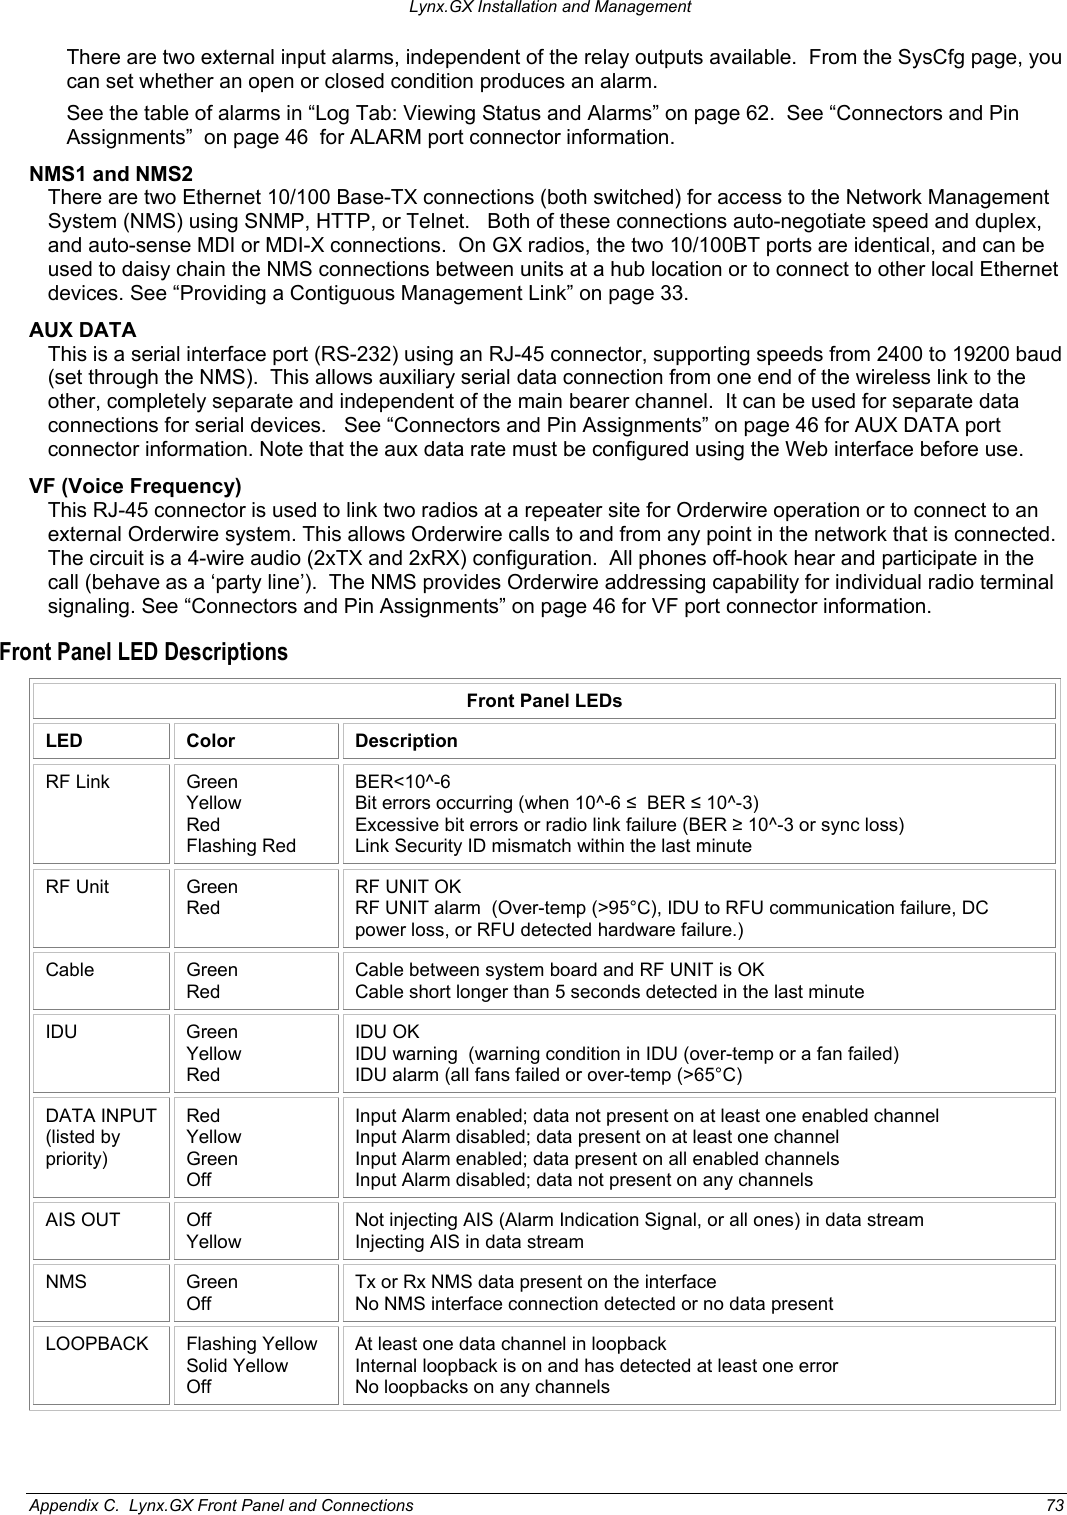 Lynx.GX Installation and Management There are two external input alarms, independent of the relay outputs available.  From the SysCfg page, you can set whether an open or closed condition produces an alarm.  See the table of alarms in “Log Tab: Viewing Status and Alarms” on page 62.  See “Connectors and Pin Assignments”  on page 46  for ALARM port connector information.   NMS1 and NMS2 There are two Ethernet 10/100 Base-TX connections (both switched) for access to the Network Management System (NMS) using SNMP, HTTP, or Telnet.   Both of these connections auto-negotiate speed and duplex, and auto-sense MDI or MDI-X connections.  On GX radios, the two 10/100BT ports are identical, and can be used to daisy chain the NMS connections between units at a hub location or to connect to other local Ethernet devices. See “Providing a Contiguous Management Link” on page 33. AUX DATA  This is a serial interface port (RS-232) using an RJ-45 connector, supporting speeds from 2400 to 19200 baud (set through the NMS).  This allows auxiliary serial data connection from one end of the wireless link to the other, completely separate and independent of the main bearer channel.  It can be used for separate data connections for serial devices.   See “Connectors and Pin Assignments” on page 46 for AUX DATA port connector information. Note that the aux data rate must be configured using the Web interface before use. VF (Voice Frequency) This RJ-45 connector is used to link two radios at a repeater site for Orderwire operation or to connect to an external Orderwire system. This allows Orderwire calls to and from any point in the network that is connected.  The circuit is a 4-wire audio (2xTX and 2xRX) configuration.  All phones off-hook hear and participate in the call (behave as a ‘party line’).  The NMS provides Orderwire addressing capability for individual radio terminal signaling. See “Connectors and Pin Assignments” on page 46 for VF port connector information. Front Panel LED Descriptions Front Panel LEDs LED Color  Description RF Link  Green Yellow Red Flashing Red BER&lt;10^-6  Bit errors occurring (when 10^-6 ≤  BER ≤ 10^-3) Excessive bit errors or radio link failure (BER ≥ 10^-3 or sync loss) Link Security ID mismatch within the last minute RF Unit  Green Red RF UNIT OK RF UNIT alarm  (Over-temp (&gt;95°C), IDU to RFU communication failure, DC power loss, or RFU detected hardware failure.) Cable Green Red Cable between system board and RF UNIT is OK Cable short longer than 5 seconds detected in the last minute IDU Green Yellow Red IDU OK IDU warning  (warning condition in IDU (over-temp or a fan failed) IDU alarm (all fans failed or over-temp (&gt;65°C) DATA INPUT (listed by priority) Red Yellow Green Off Input Alarm enabled; data not present on at least one enabled channel Input Alarm disabled; data present on at least one channel Input Alarm enabled; data present on all enabled channels Input Alarm disabled; data not present on any channels AIS OUT  Off Yellow Not injecting AIS (Alarm Indication Signal, or all ones) in data stream  Injecting AIS in data stream  NMS Green Off Tx or Rx NMS data present on the interface No NMS interface connection detected or no data present LOOPBACK Flashing Yellow Solid Yellow Off At least one data channel in loopback Internal loopback is on and has detected at least one error No loopbacks on any channels Appendix C.  Lynx.GX Front Panel and Connections  73 